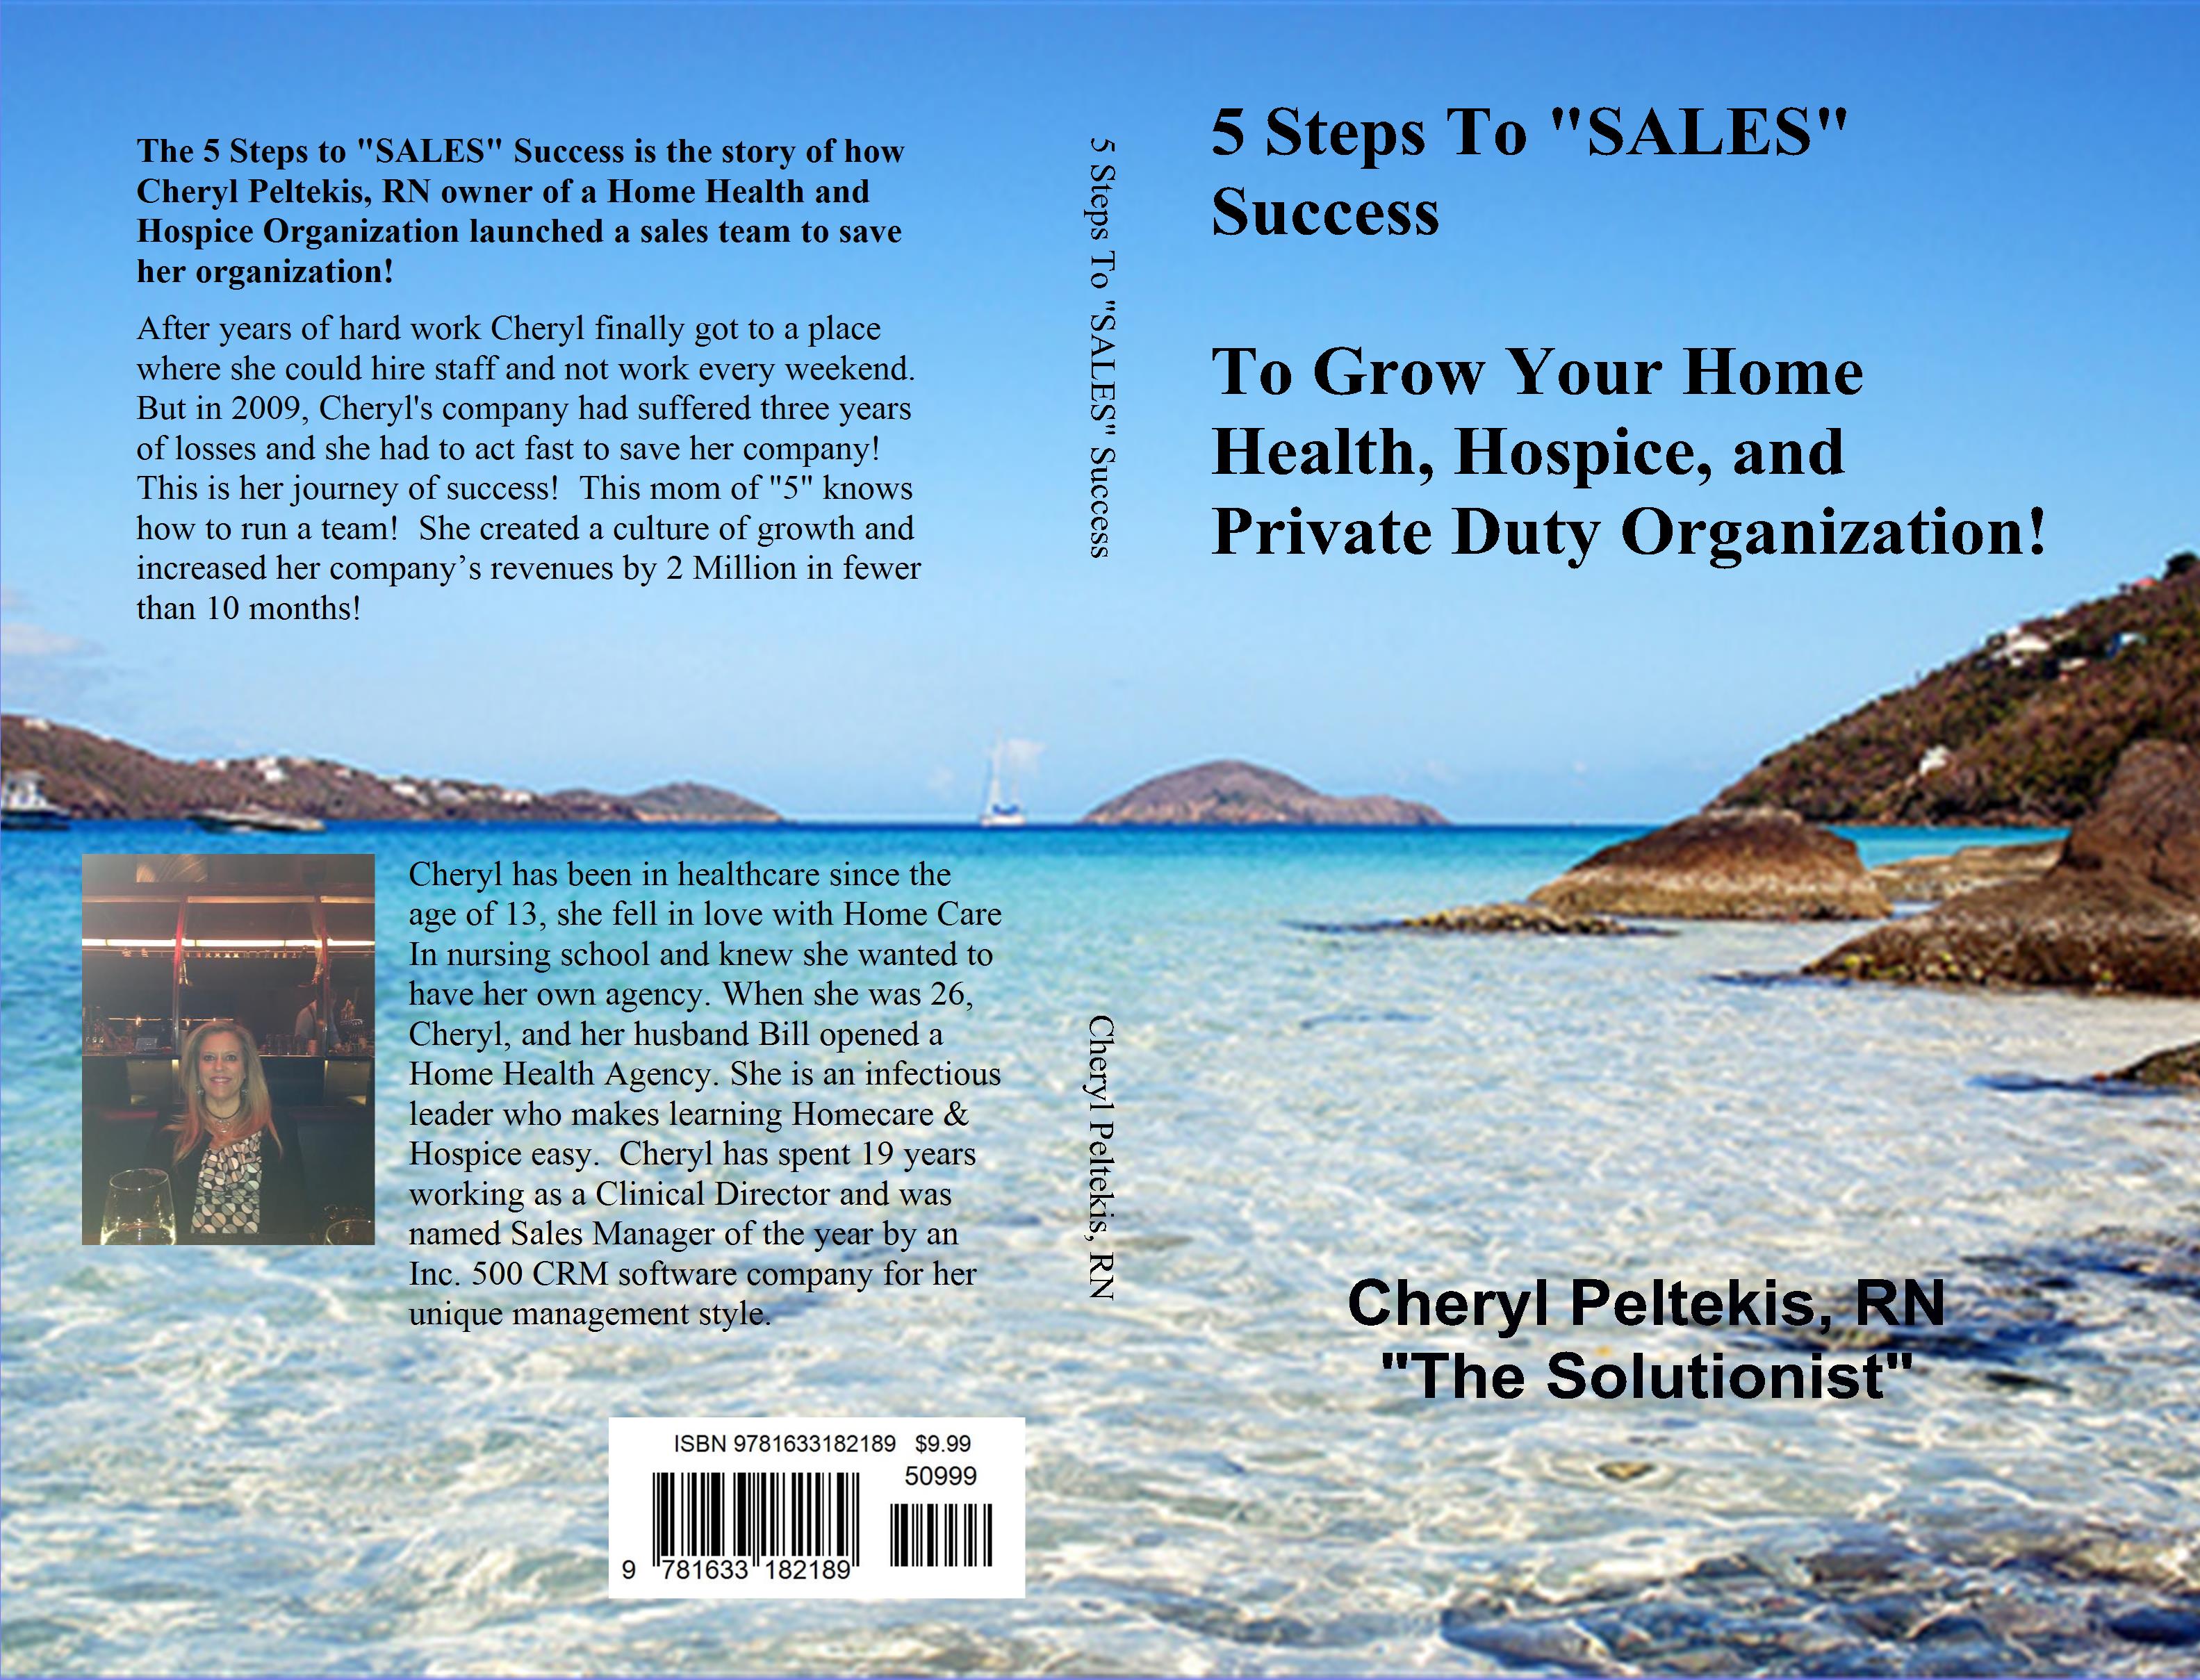 5 Steps To "SALES" Success To Grow Your Home Health, Hospice, and Private Duty Organization! cover image